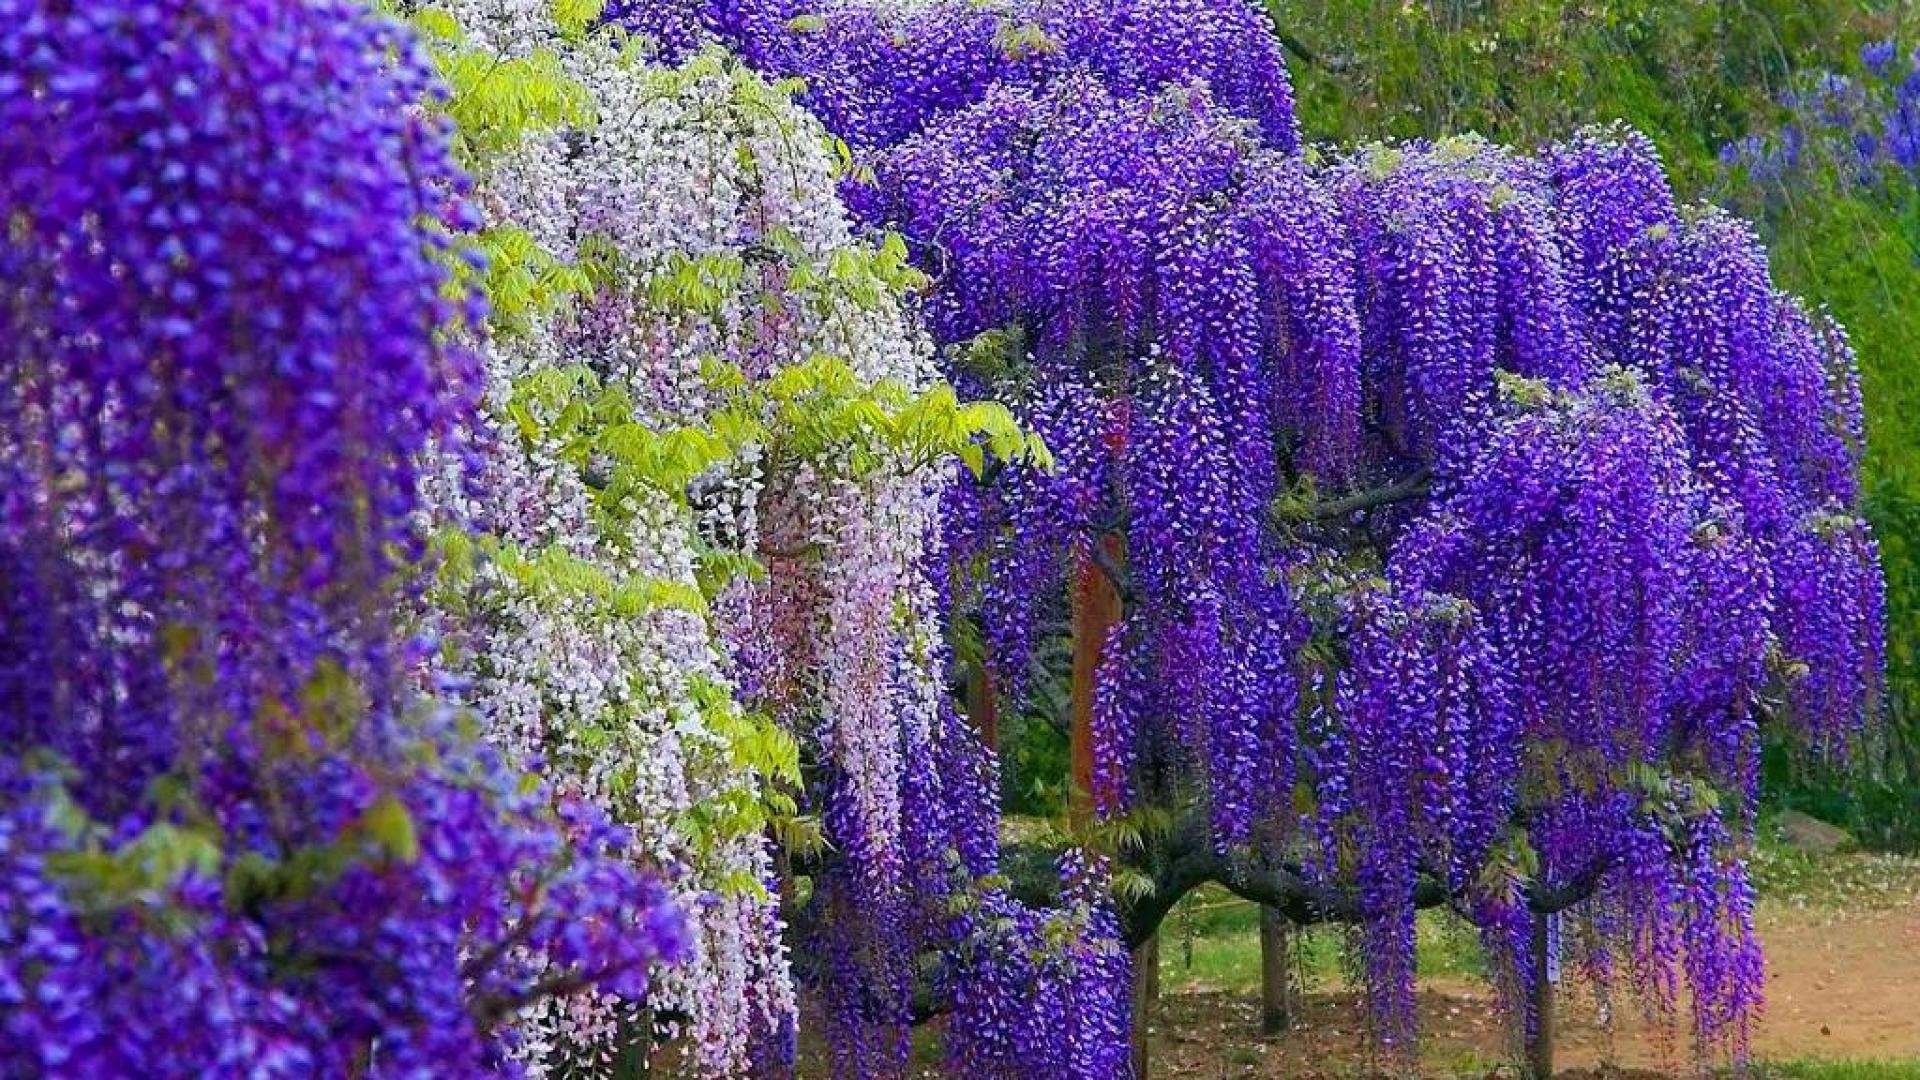 Wallpaper Tags wisteria garden summer lovely rest park nature nice beautiful trees colorful beauty